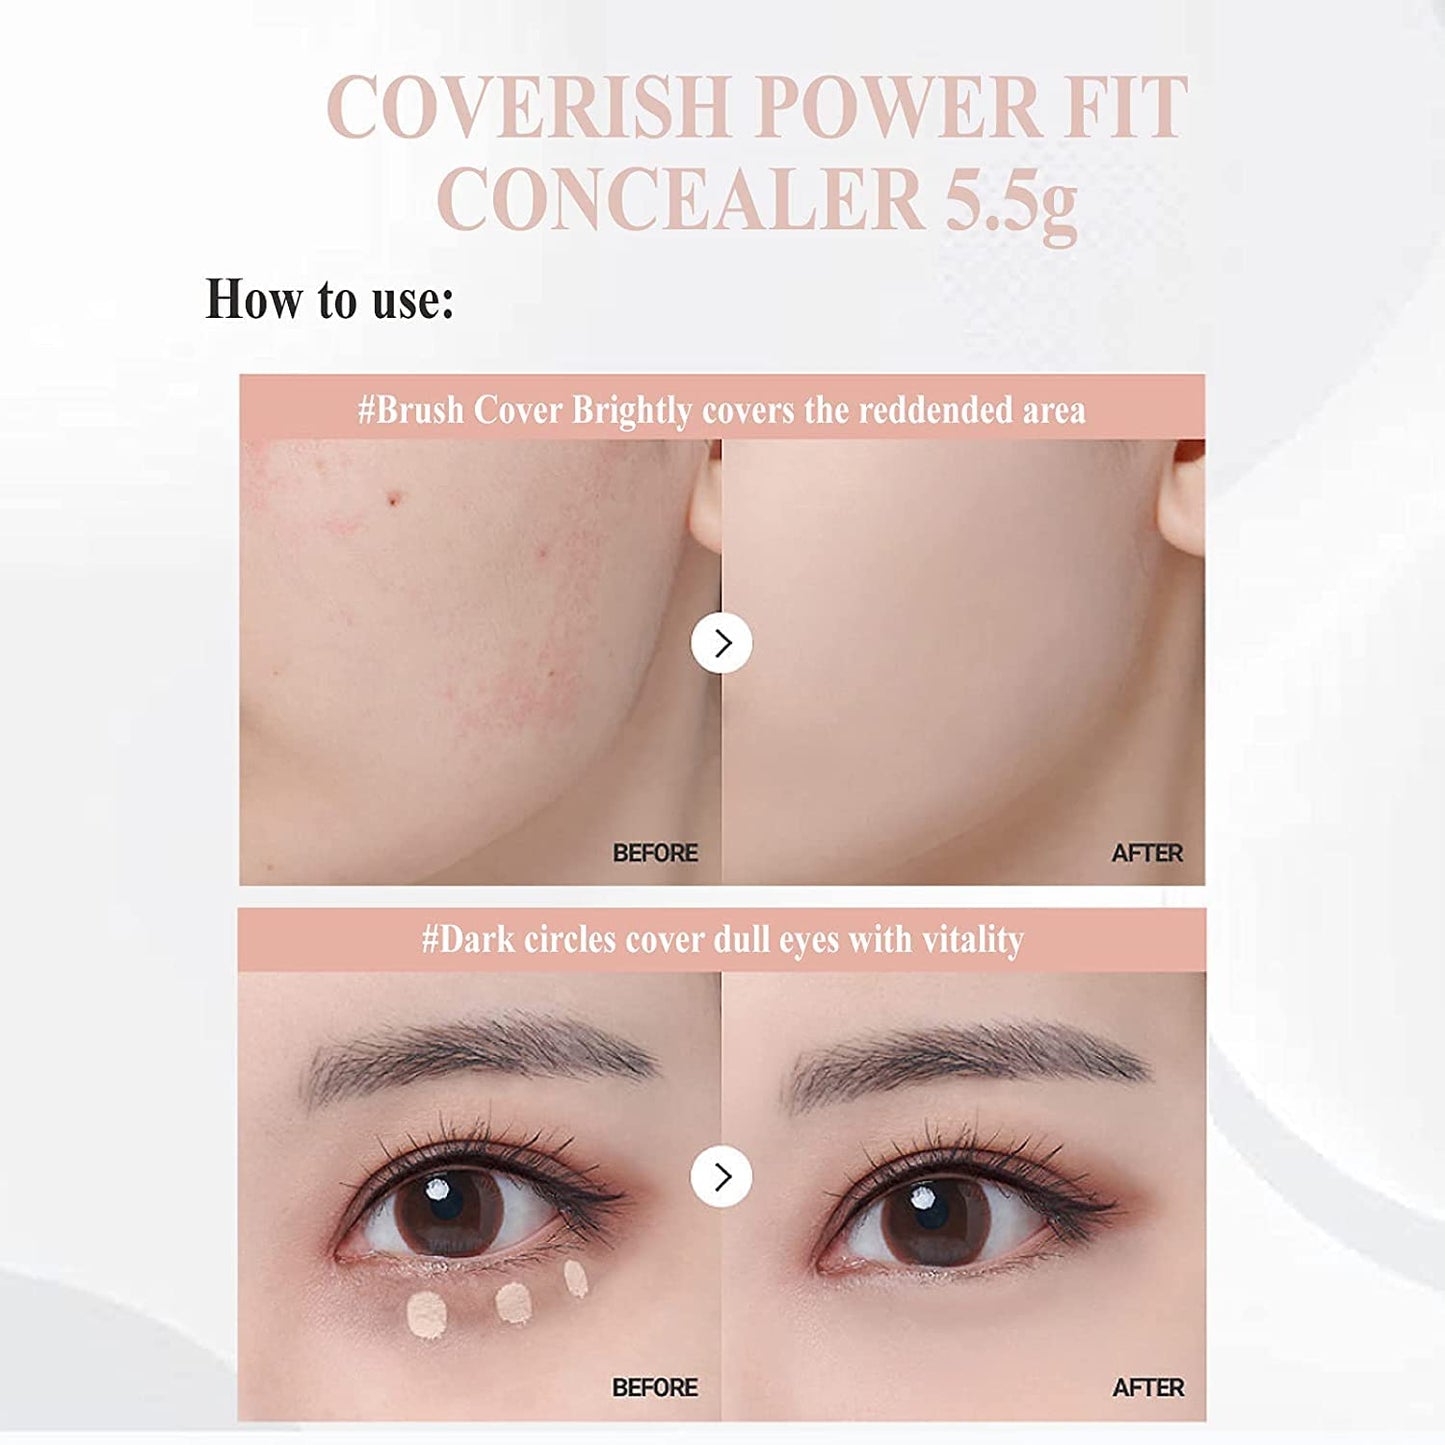 Coverish Power Fit Concealer 5.5g